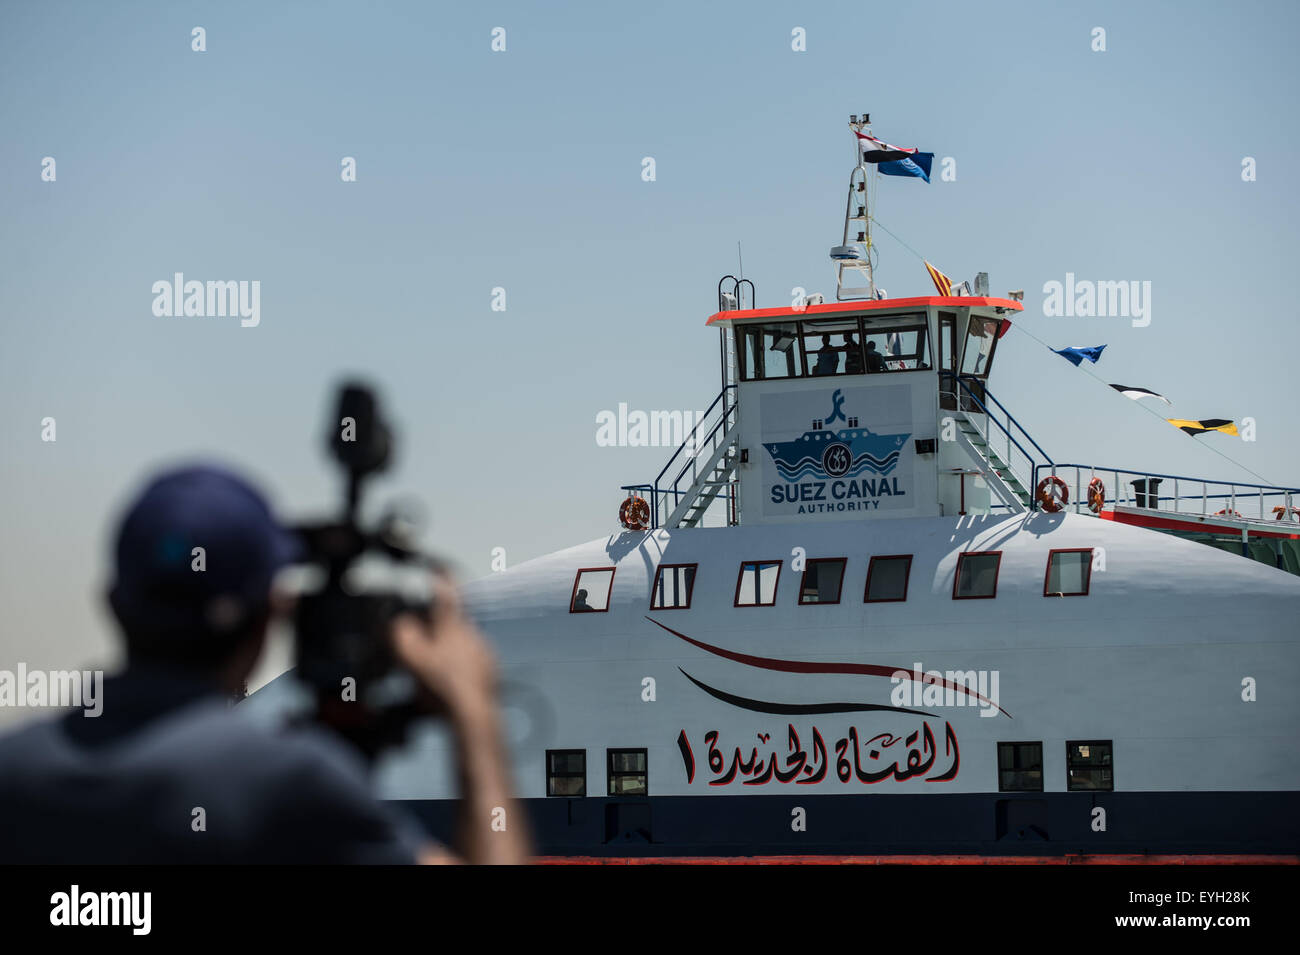 Ismailia, Egypt. 29th July, 2015. A cameraman takes video clips on the new Suez Canal in Ismailia, a port city in Egypt, on July 29, 2015. The dredging work of Egypt's 'New Suez Canal' has been completed and the waterway is ready as well as safe for huge ship navigation, Mohab Memish, head of the Suez Canal Authority (SCA), told reporters in a press conference Wednesday. © Pan Chaoyue/Xinhua/Alamy Live News Stock Photo